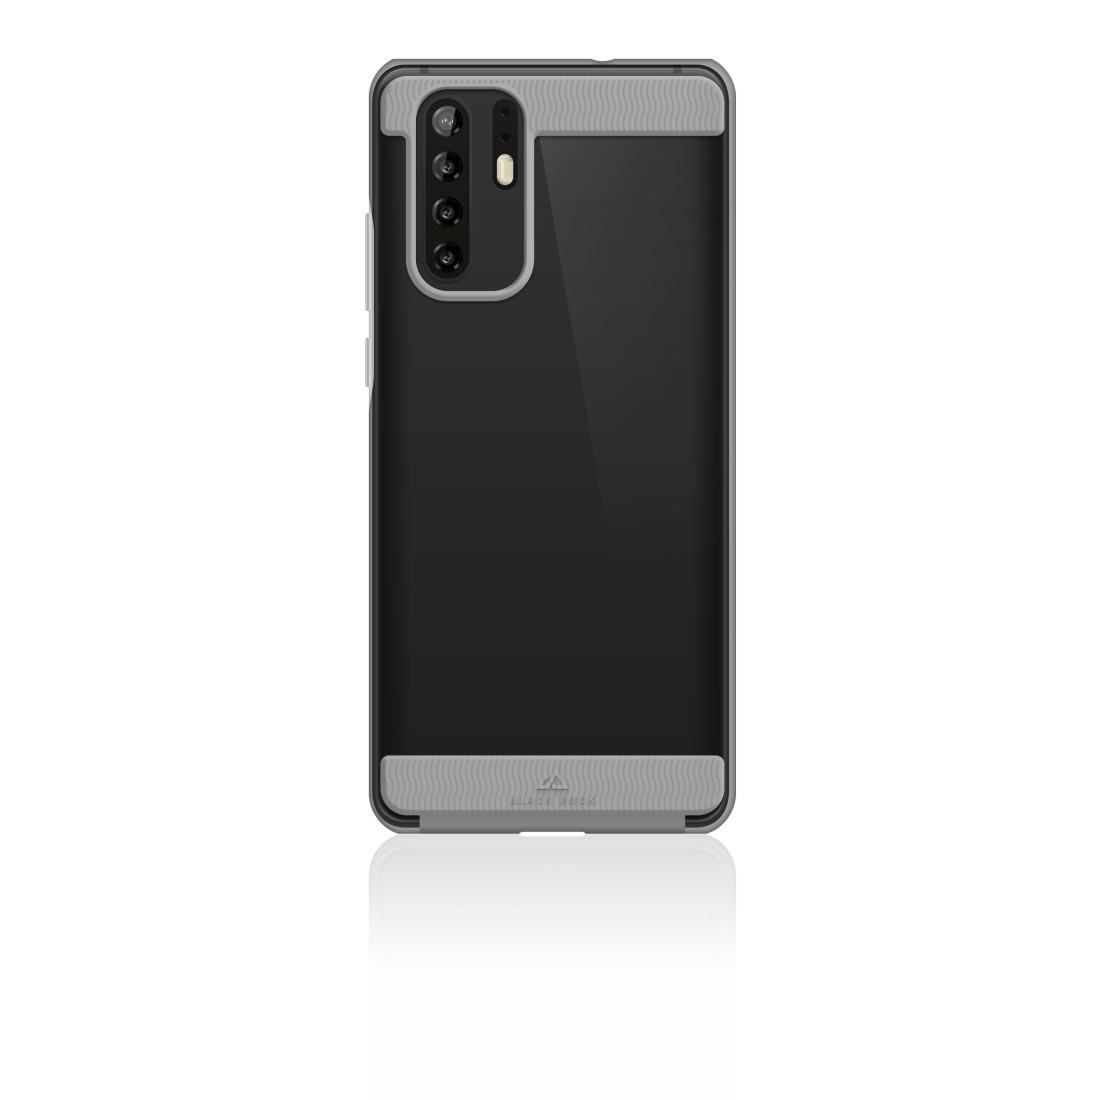 ROCK Transparent Backcover, BLACK P30 Huawei, Pro, Air Robust,